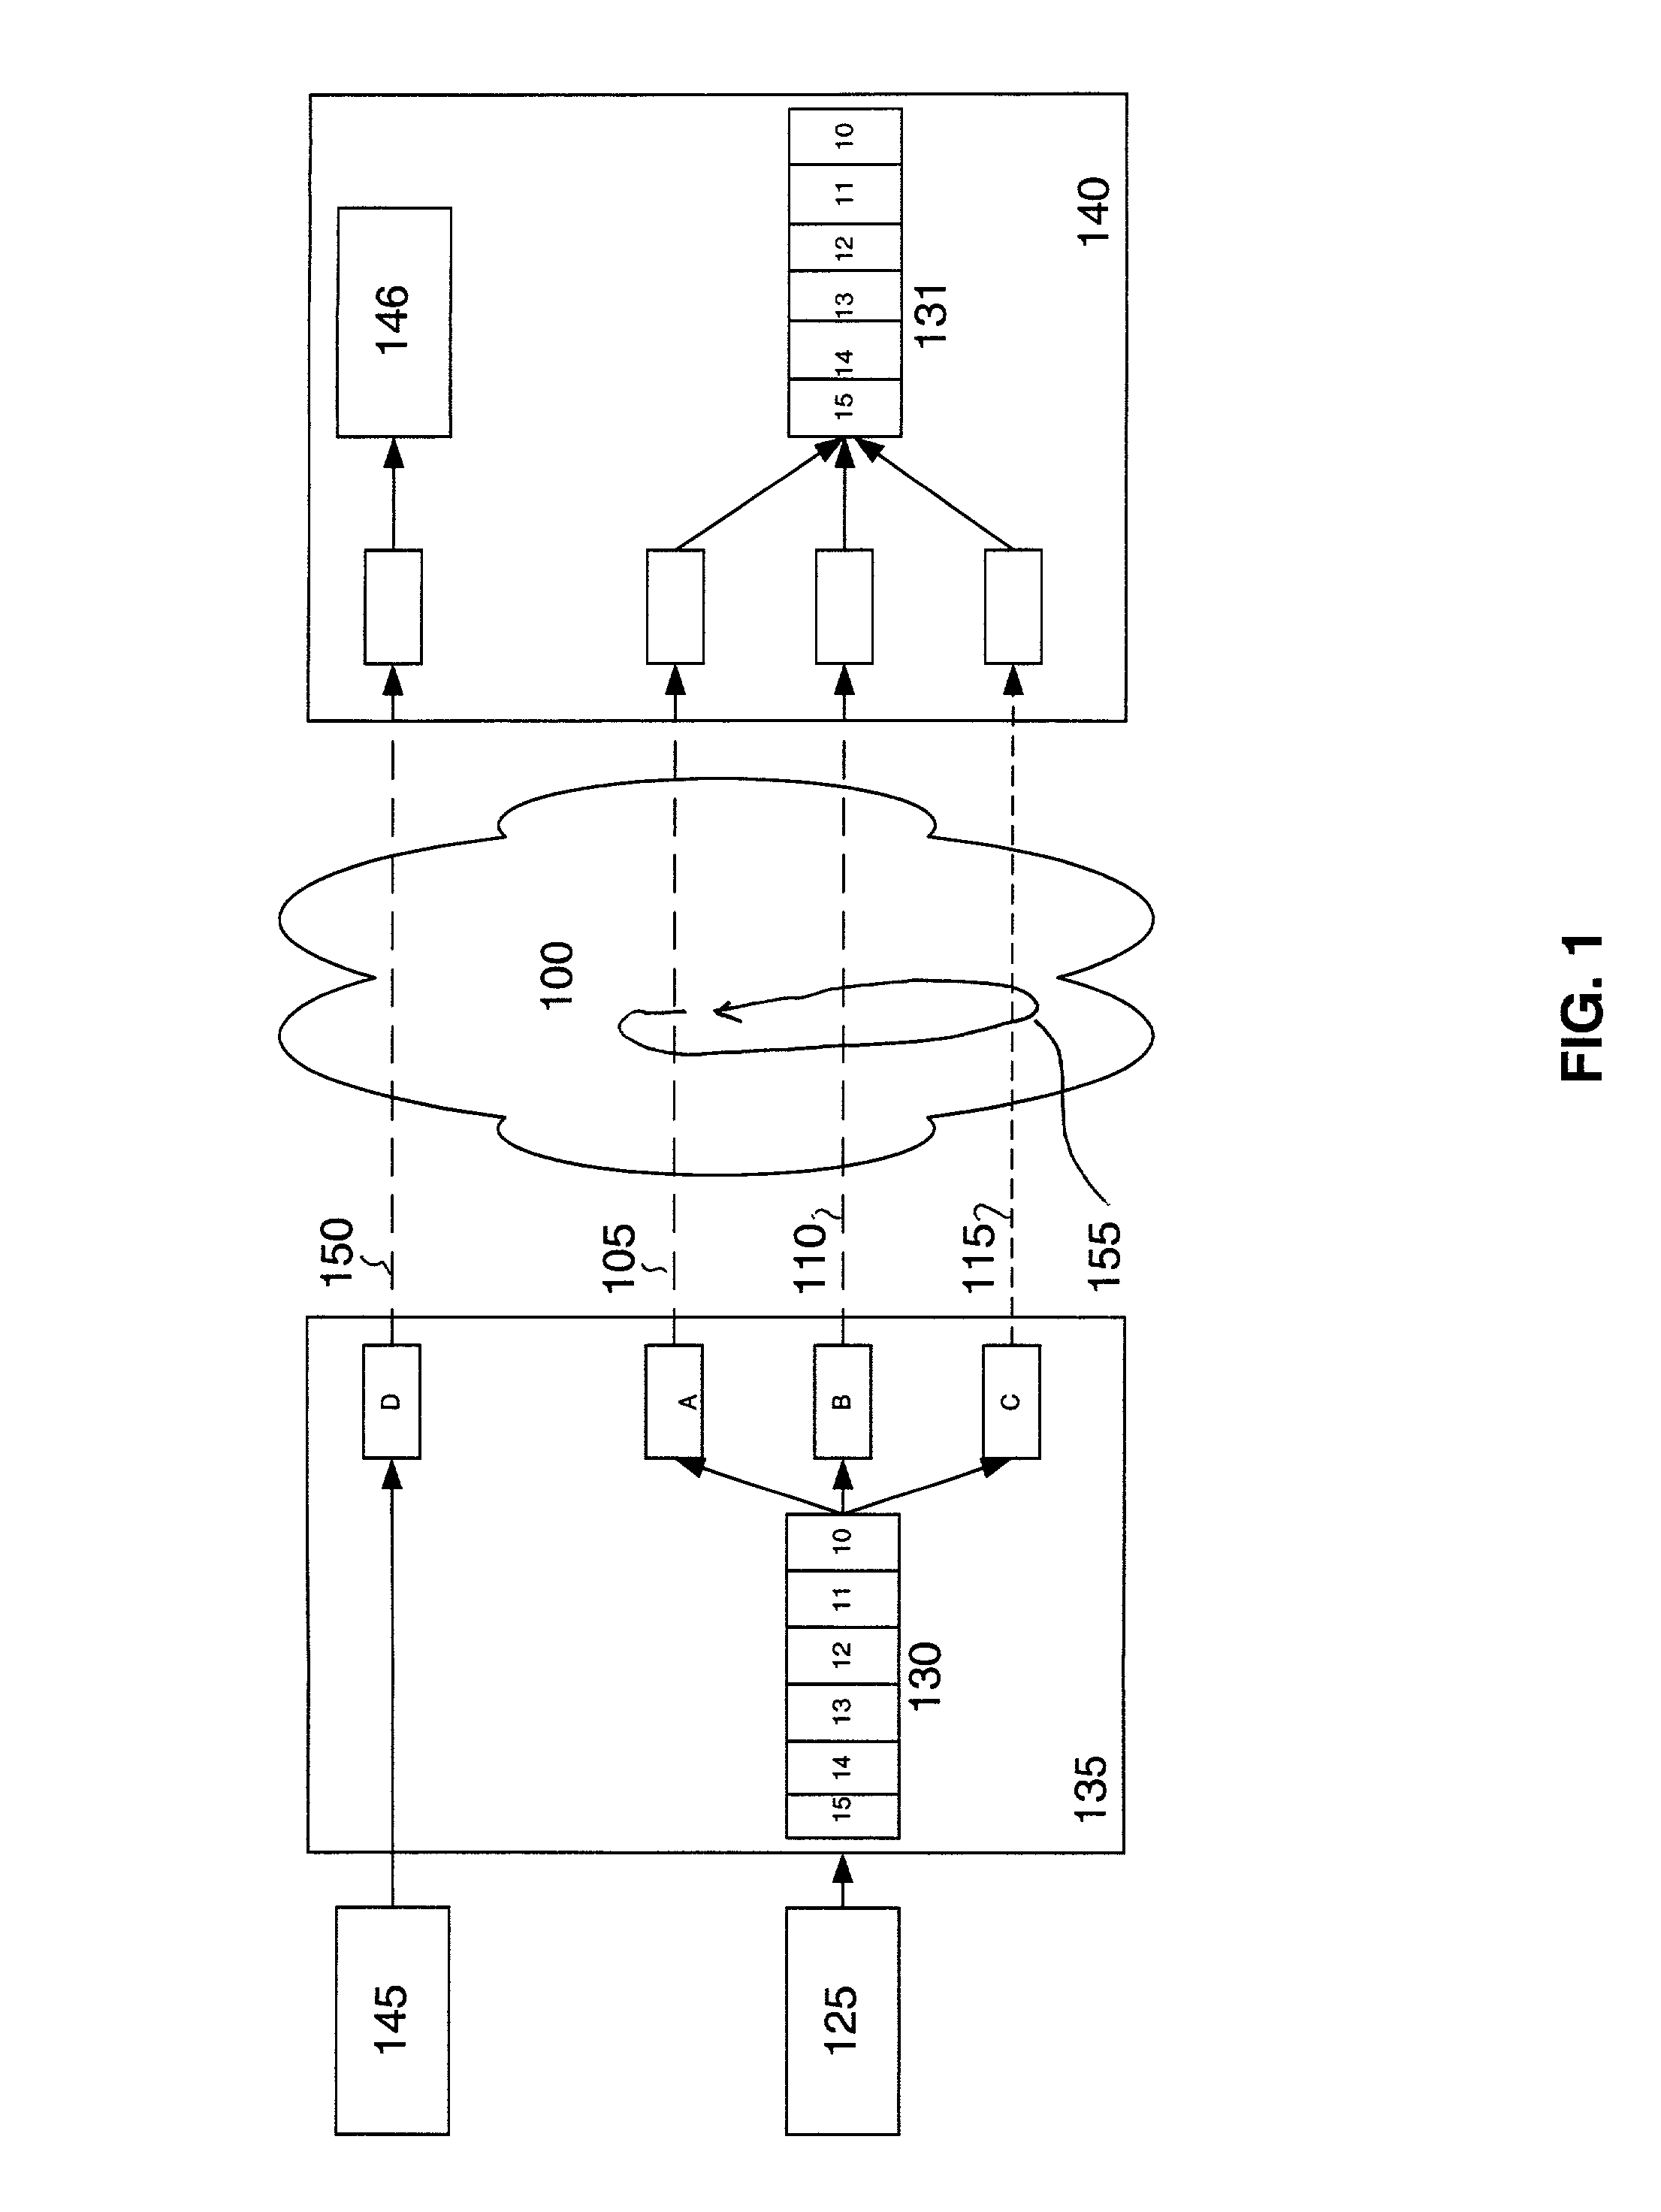 Method for multi-link load balancing to improve sequenced delivery of frames at peer end